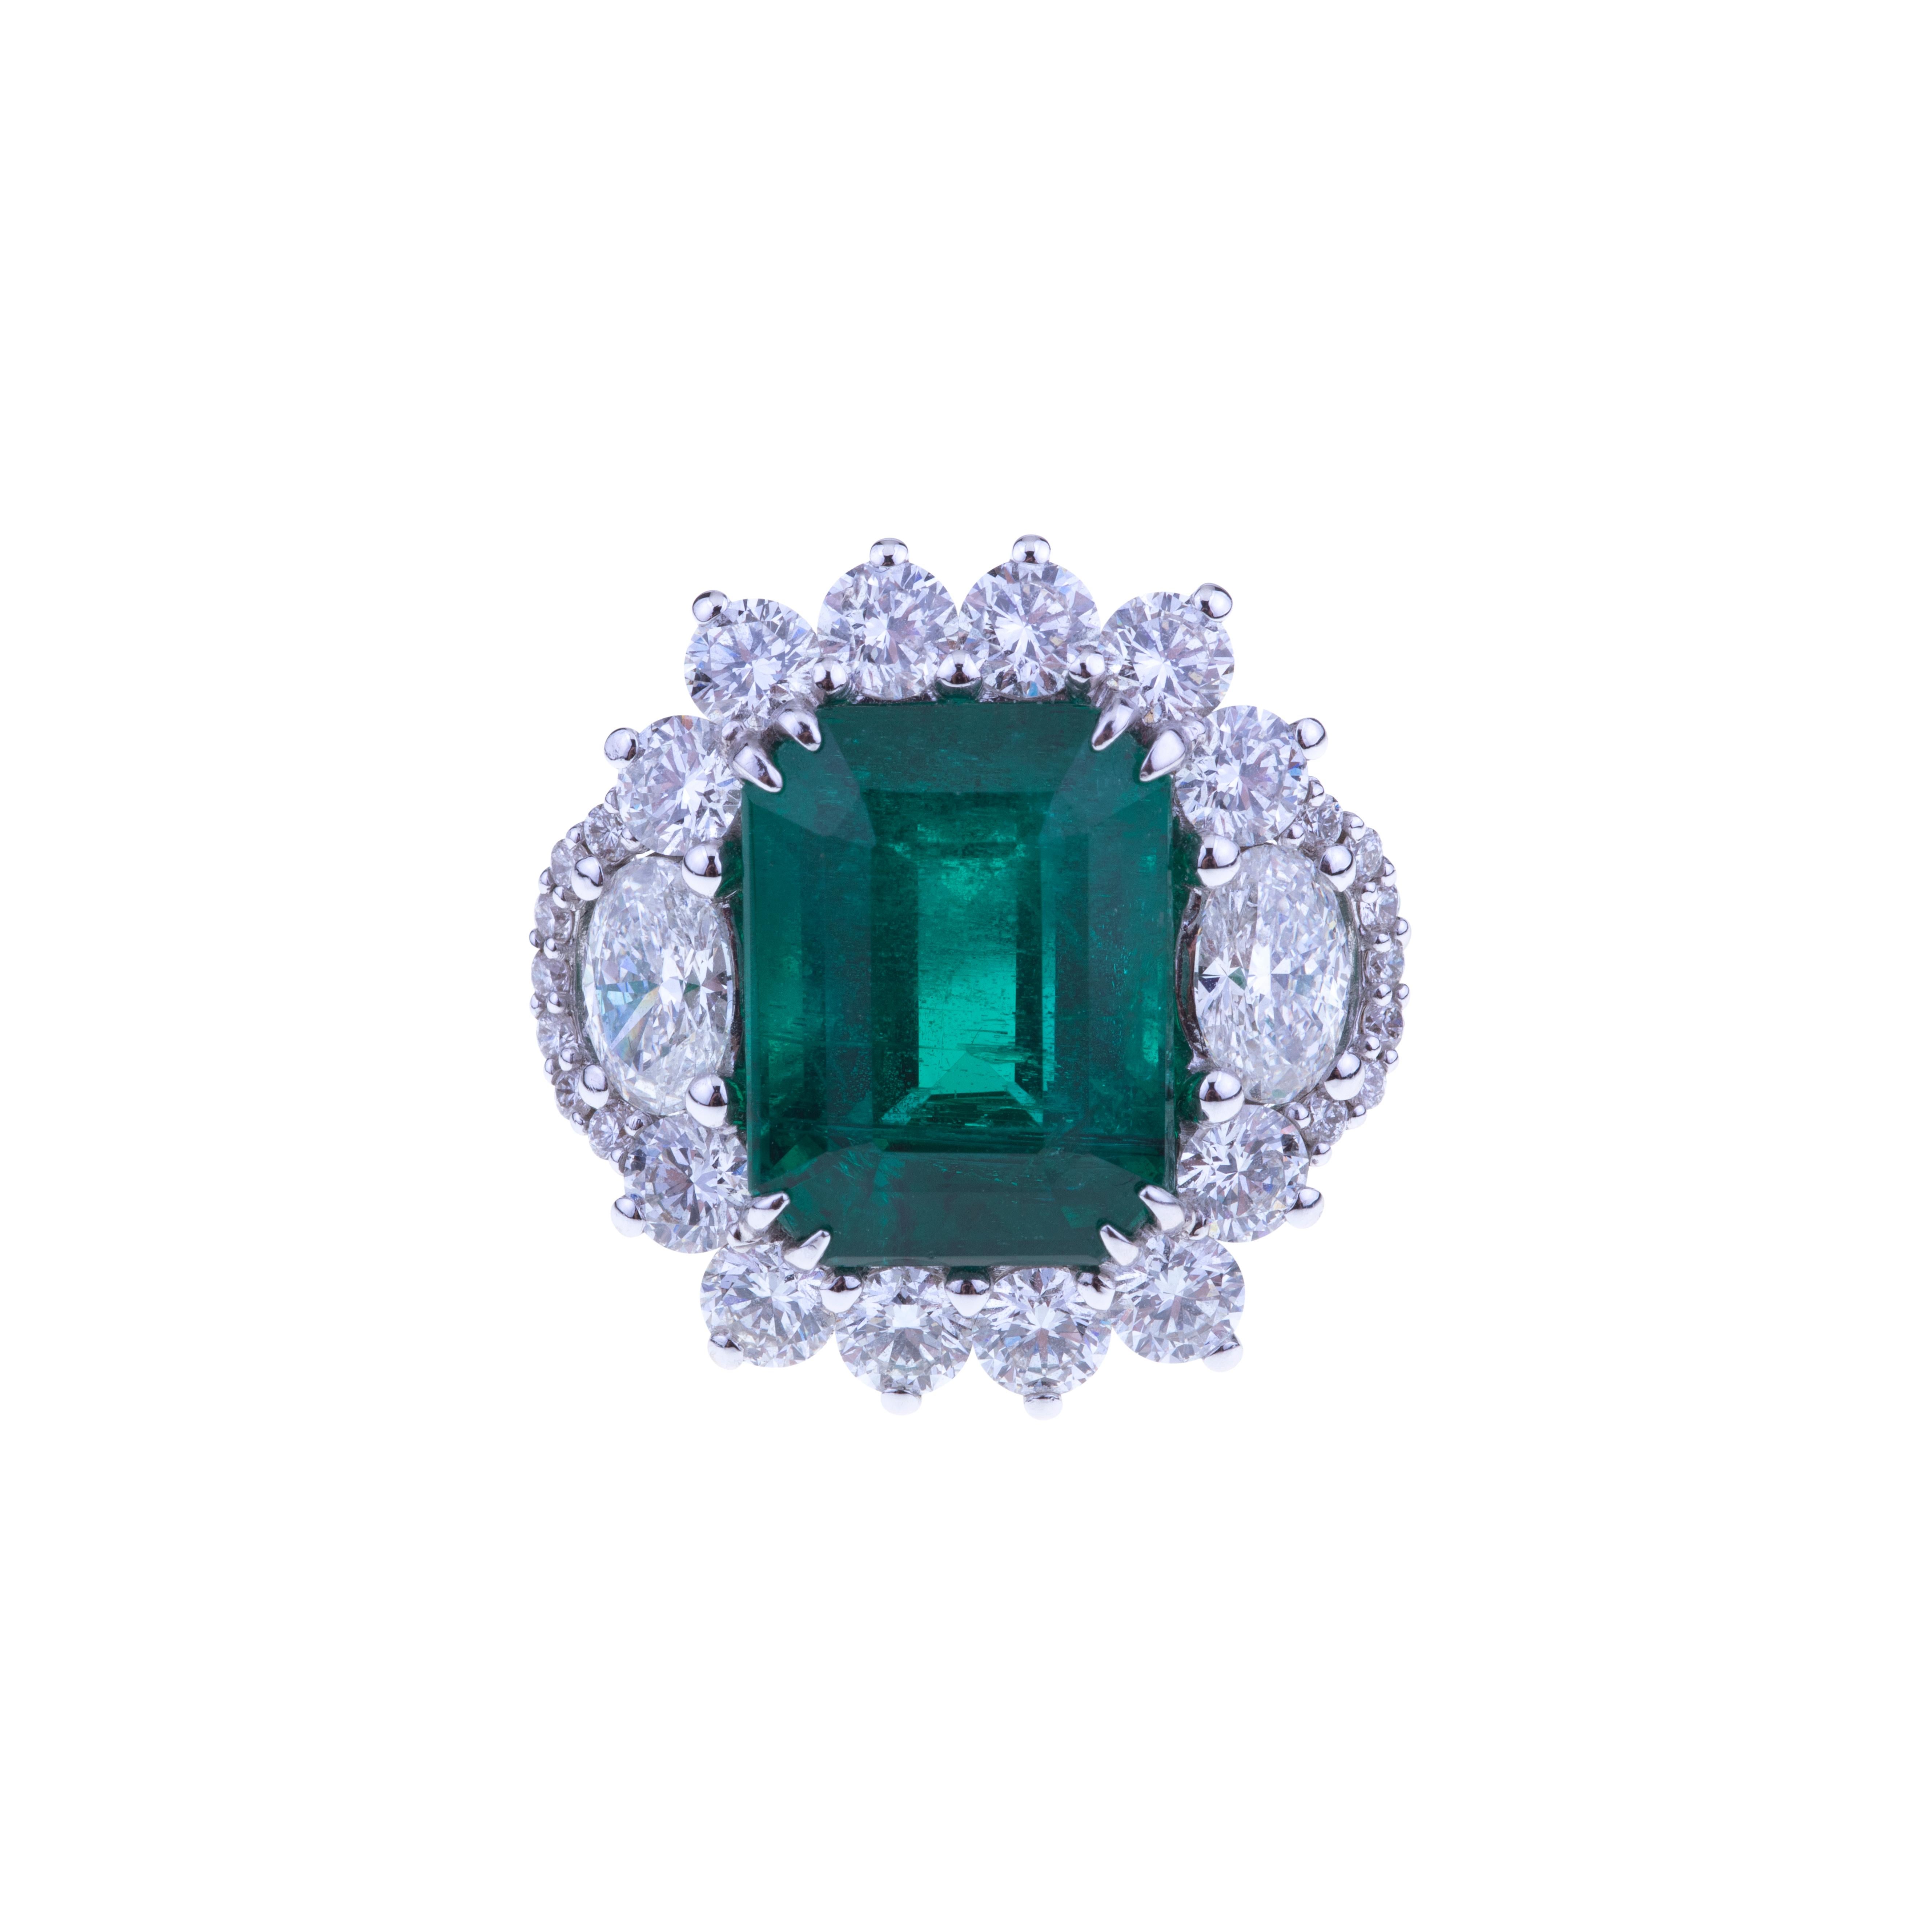 Stunning Emerald Ring ct. 7.41 with Diamonds. Unique Stone with Certificate GRS.
Classic Design for this Ring with a Stunning Emerald Vivid Green Octagonal Shape (ct. 7.41 Certificate GRS 2017-056597) origin Zambia with Diamonds on the side (ct.